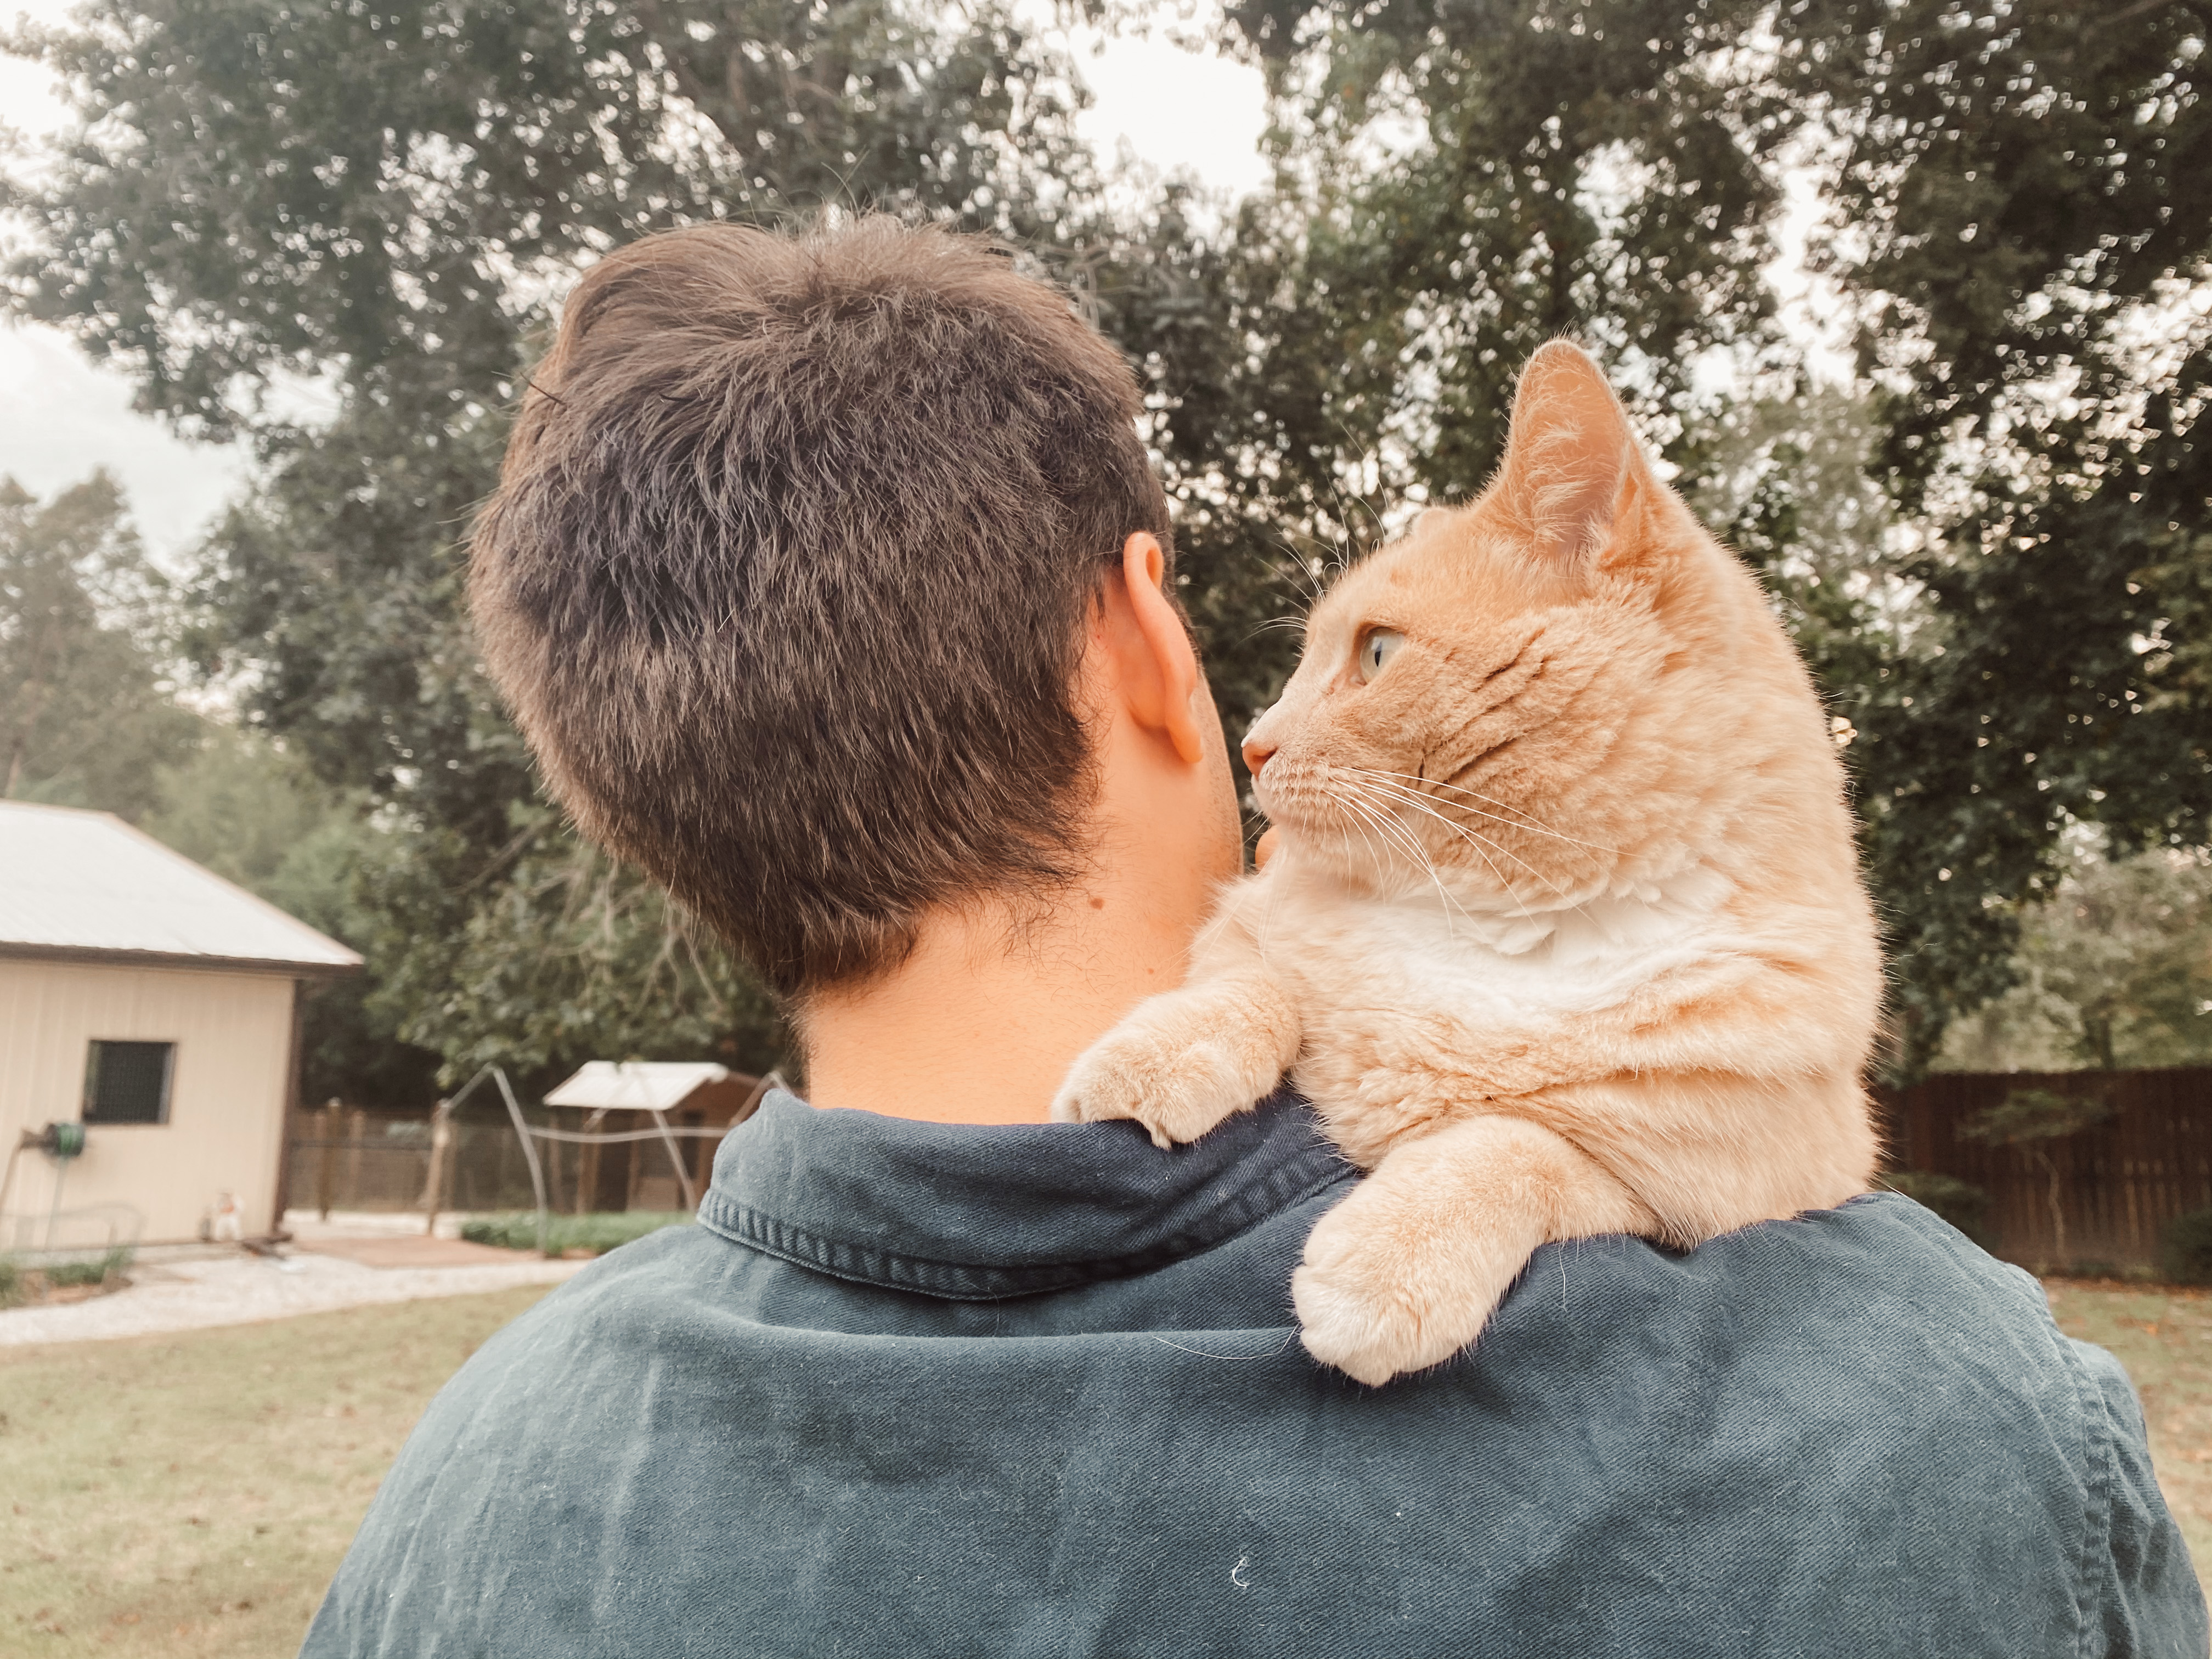 The importance of Emotional Support Animals